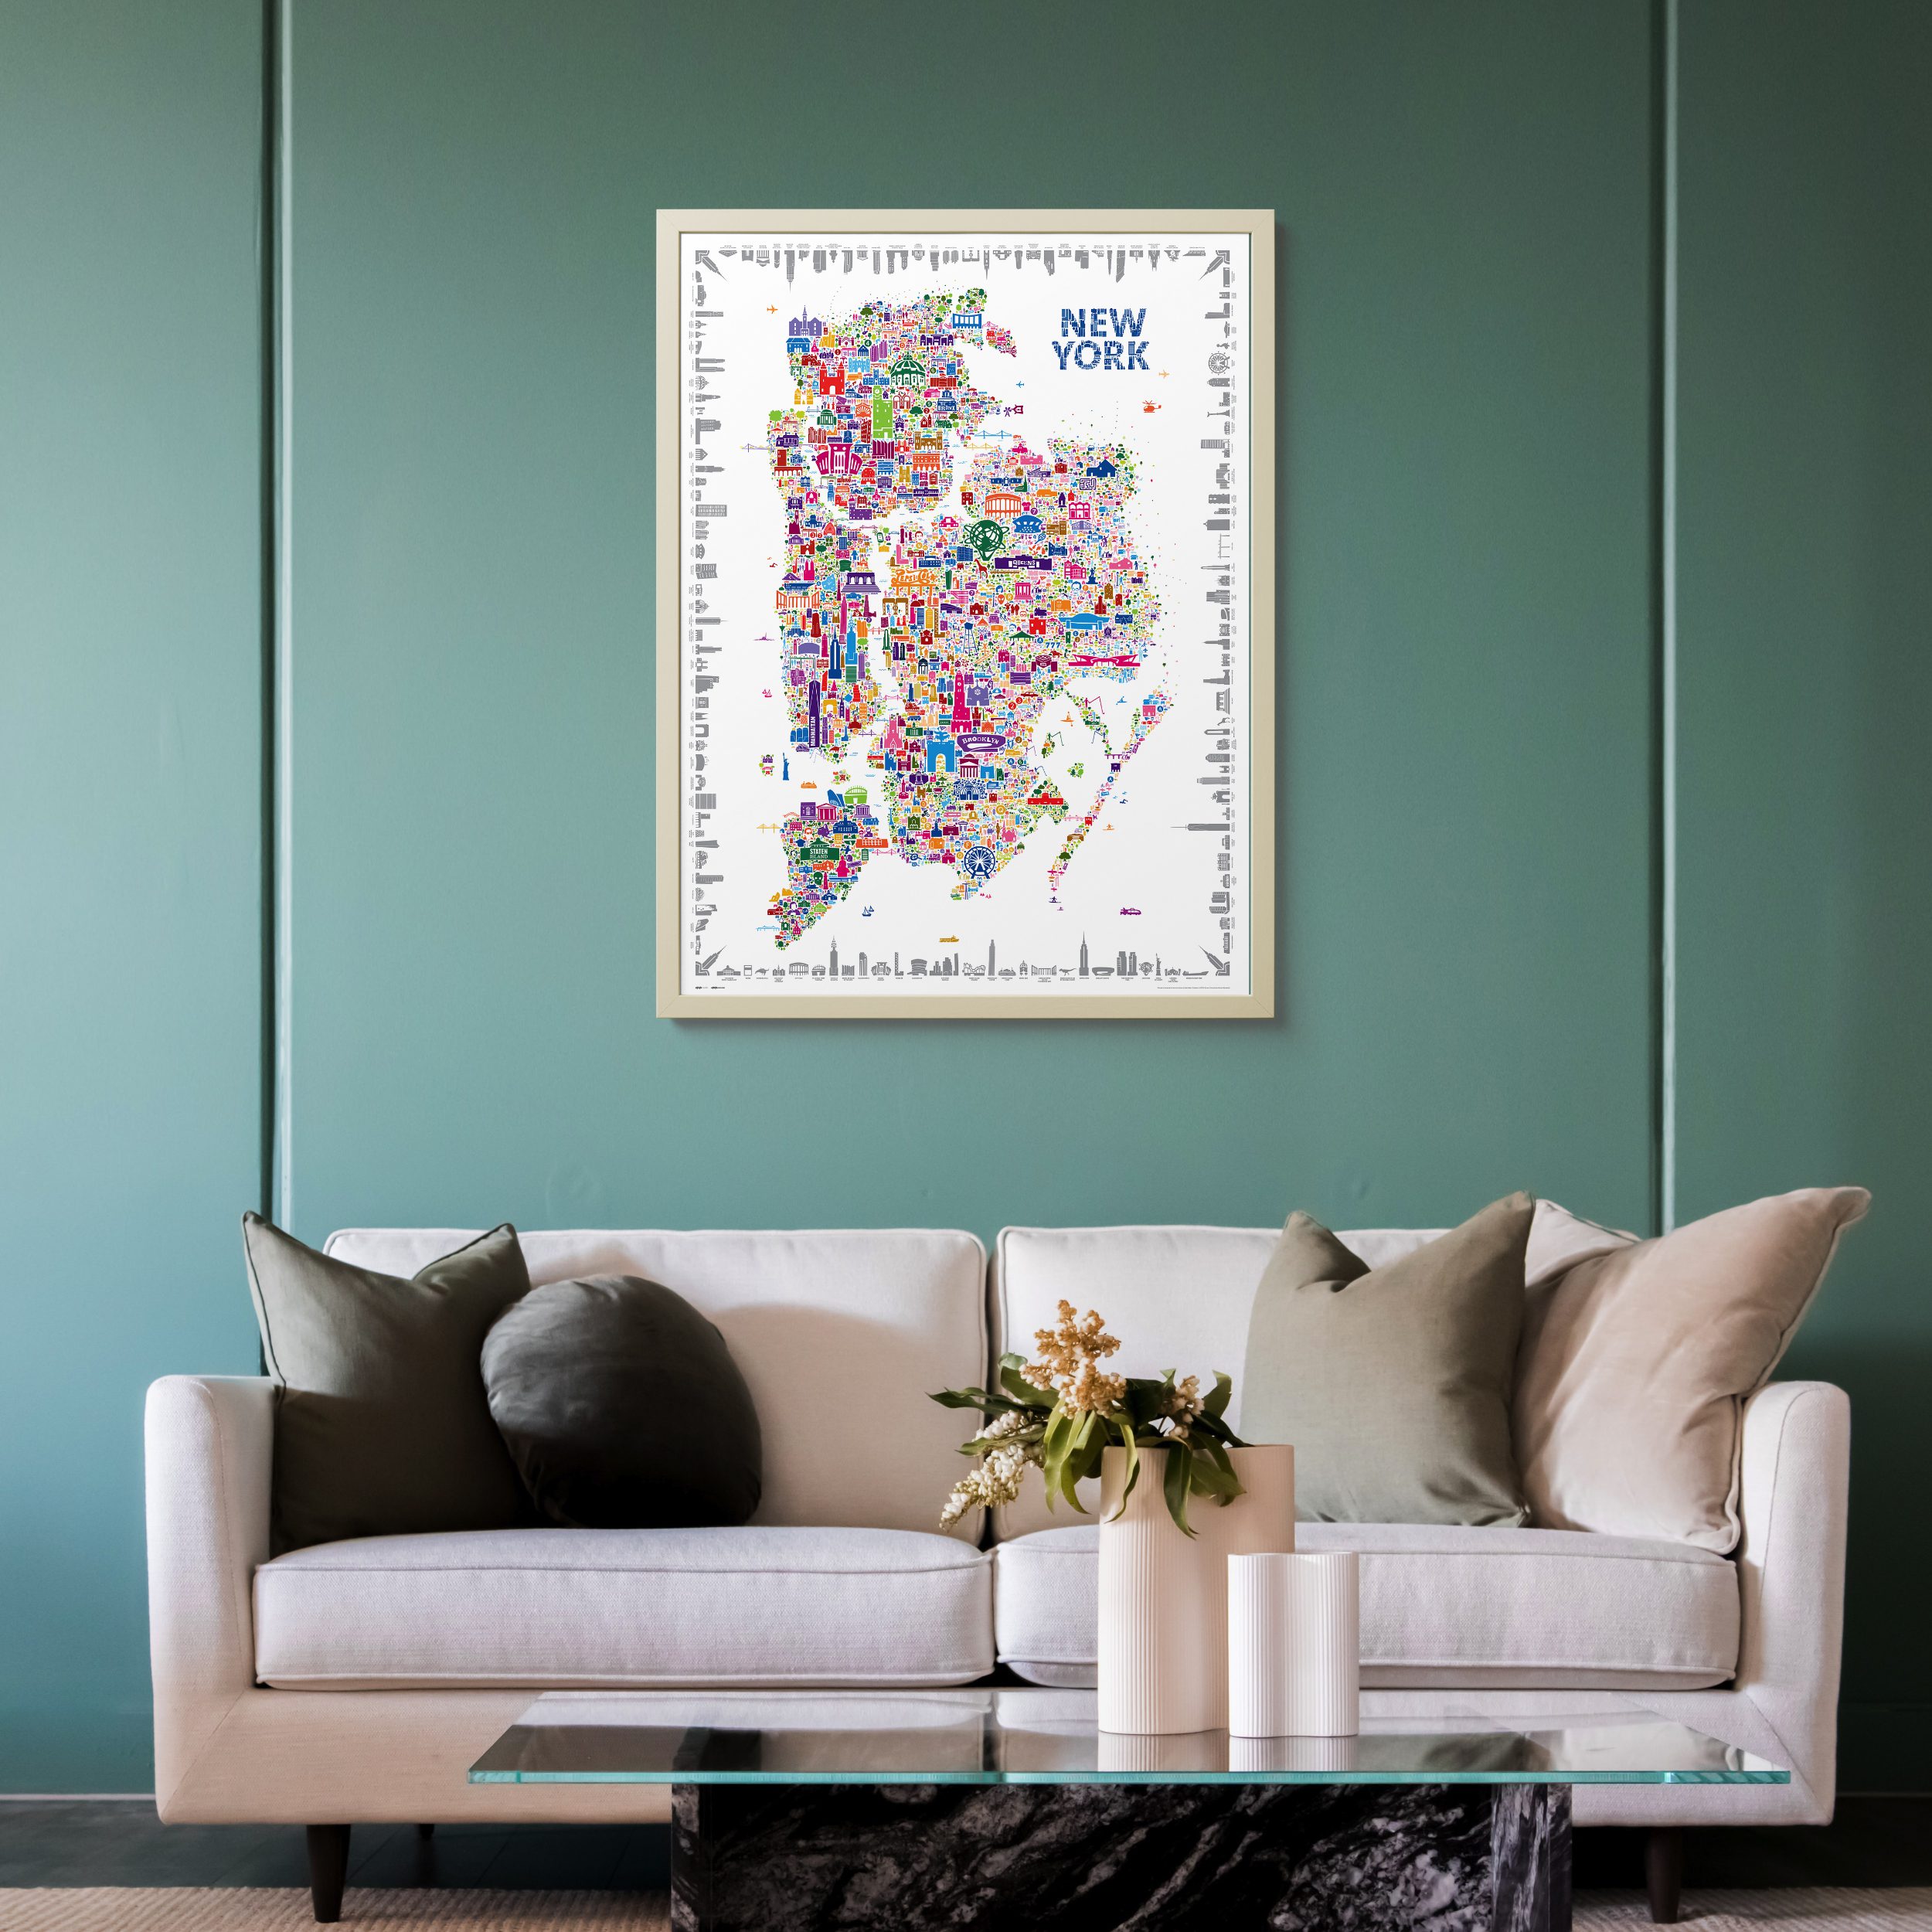 Alfalfa NY NYC New York city five boroughs Map Modern Poster Print for Living-Room Bedroom Office and Kitchen Artwork Prints Aesthetic Style Home Decor Wall Art Gift Large Vintage Cool souvenir of the bronx brooklyn queens manhattan staten island